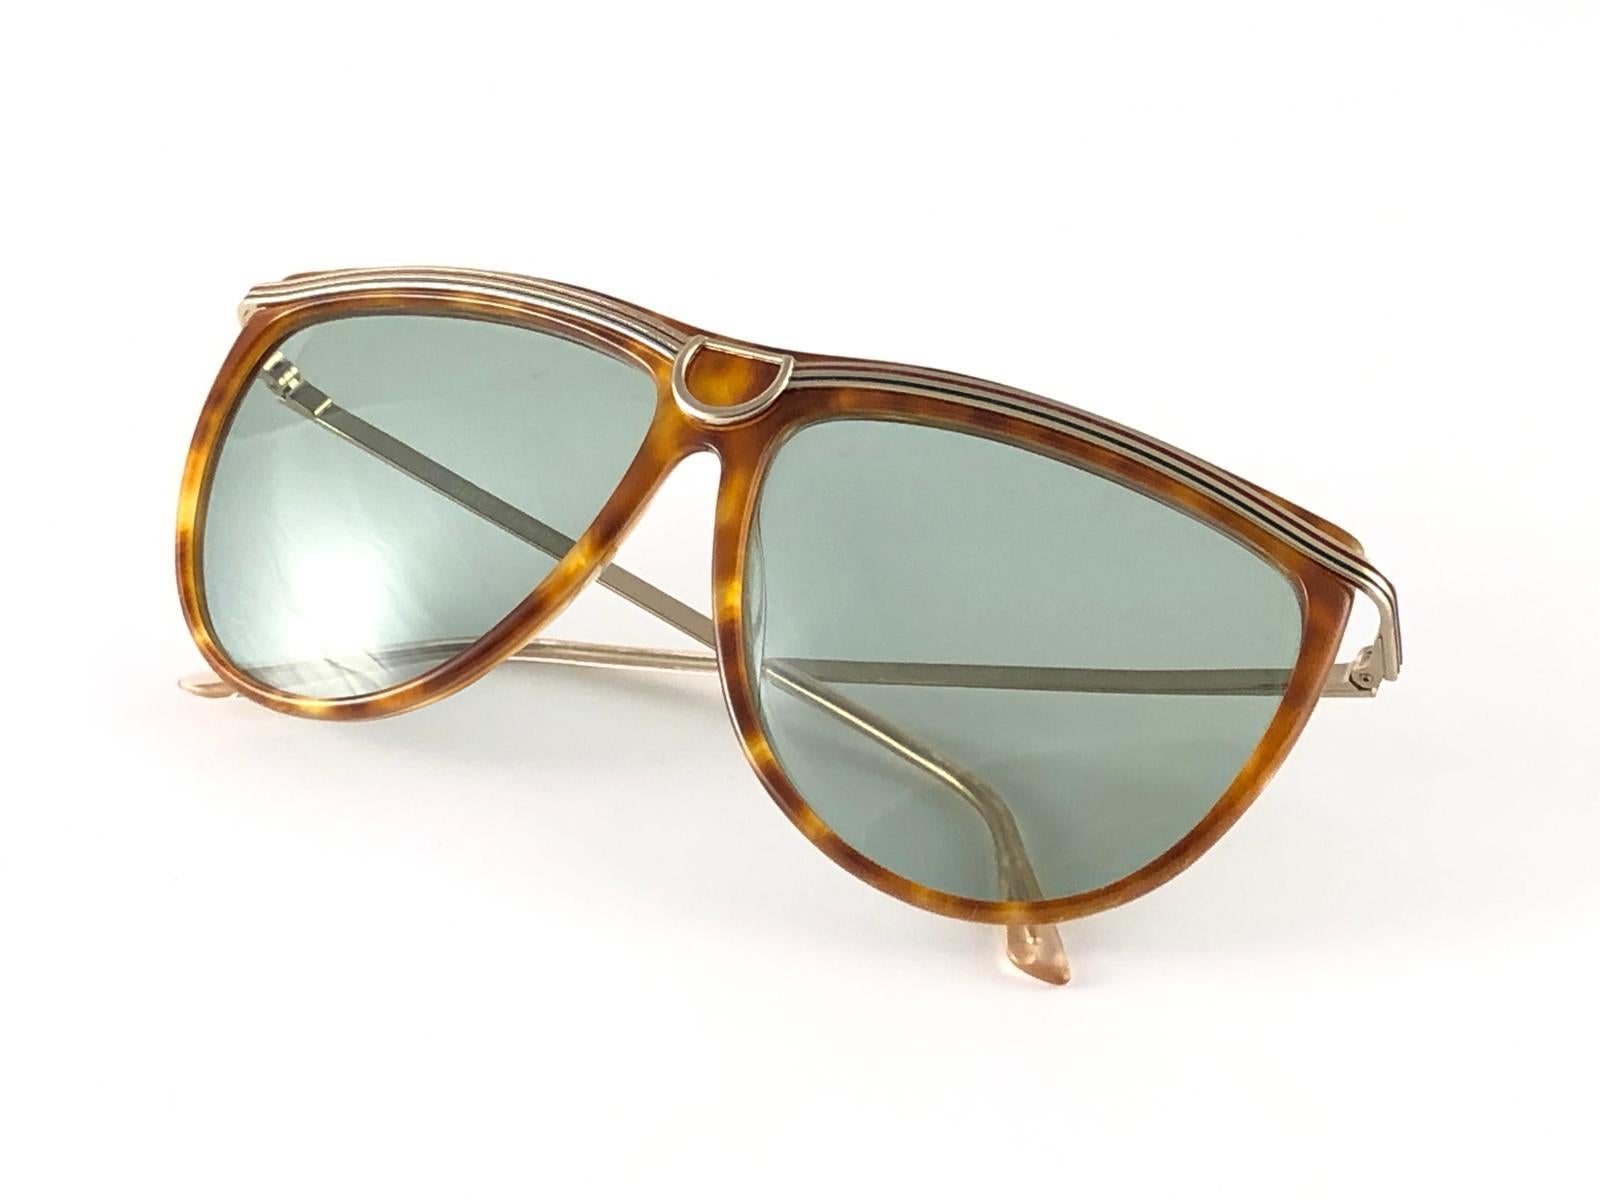 New Vintage Gucci 2303 S Tortoise & Gold Accents Sunglasses 1980's Made in Italy 3